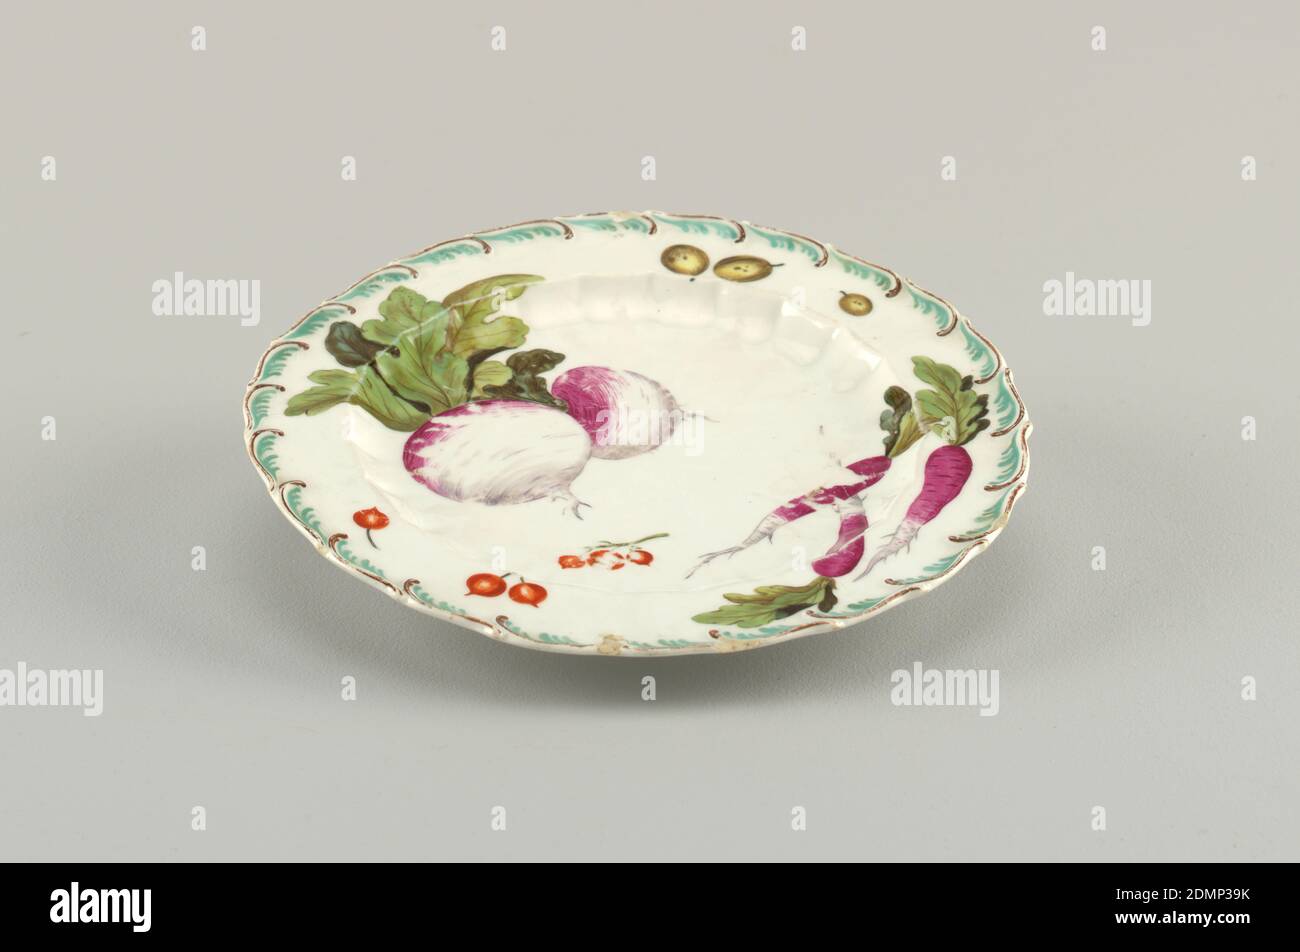 Fruit Plate, Chelsea Porcelain Manufactory, English, established ca. 1743/45, soft paste porcelain, vitreous enamel, Scalloped circular form with brown and aqua foliate scroll. Foliage includes a radish, a peach, red and black currants, cucumbers and vines., England, 1753–1756, ceramics, Decorative Arts, plate, plate Stock Photo